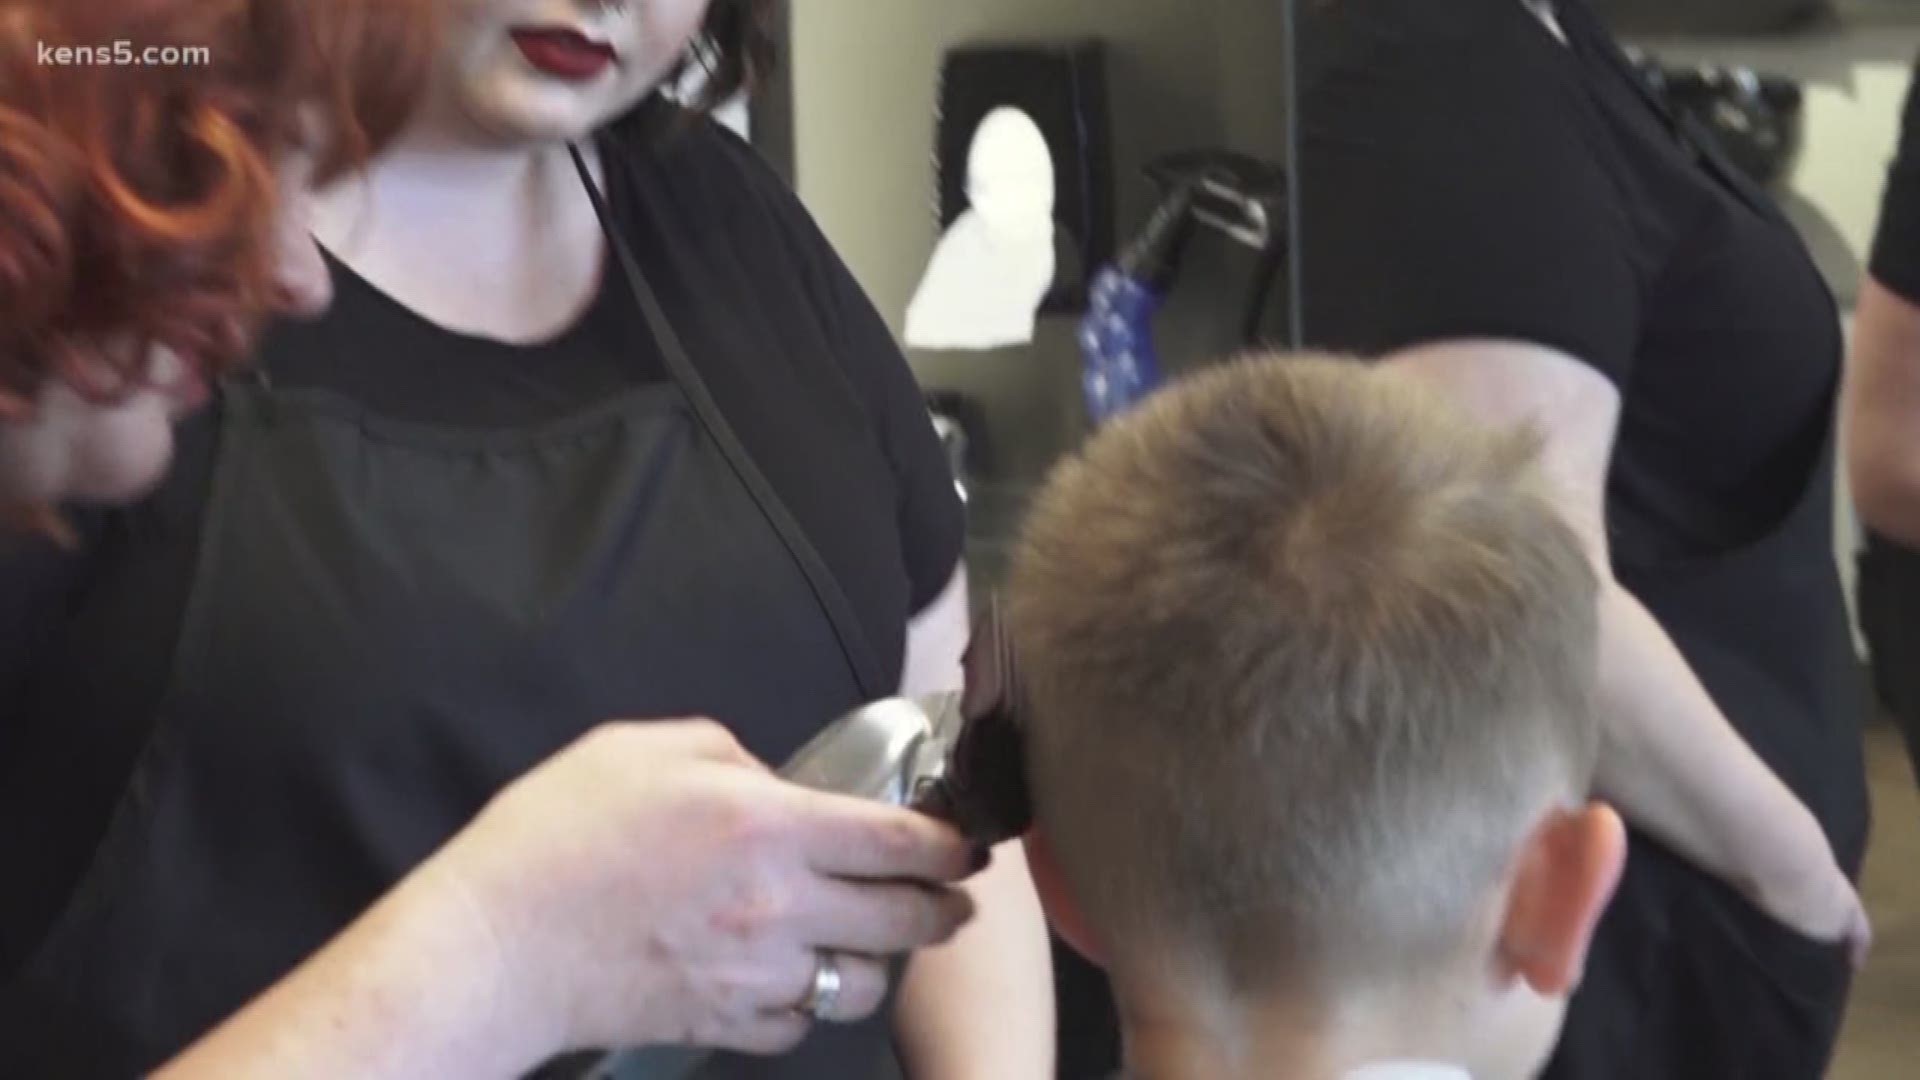 The school year is in full swing, and kids are headed to the classroom dressed to impress. But for children with autism, the grooming process can sometimes pose an extra challenge for parents.